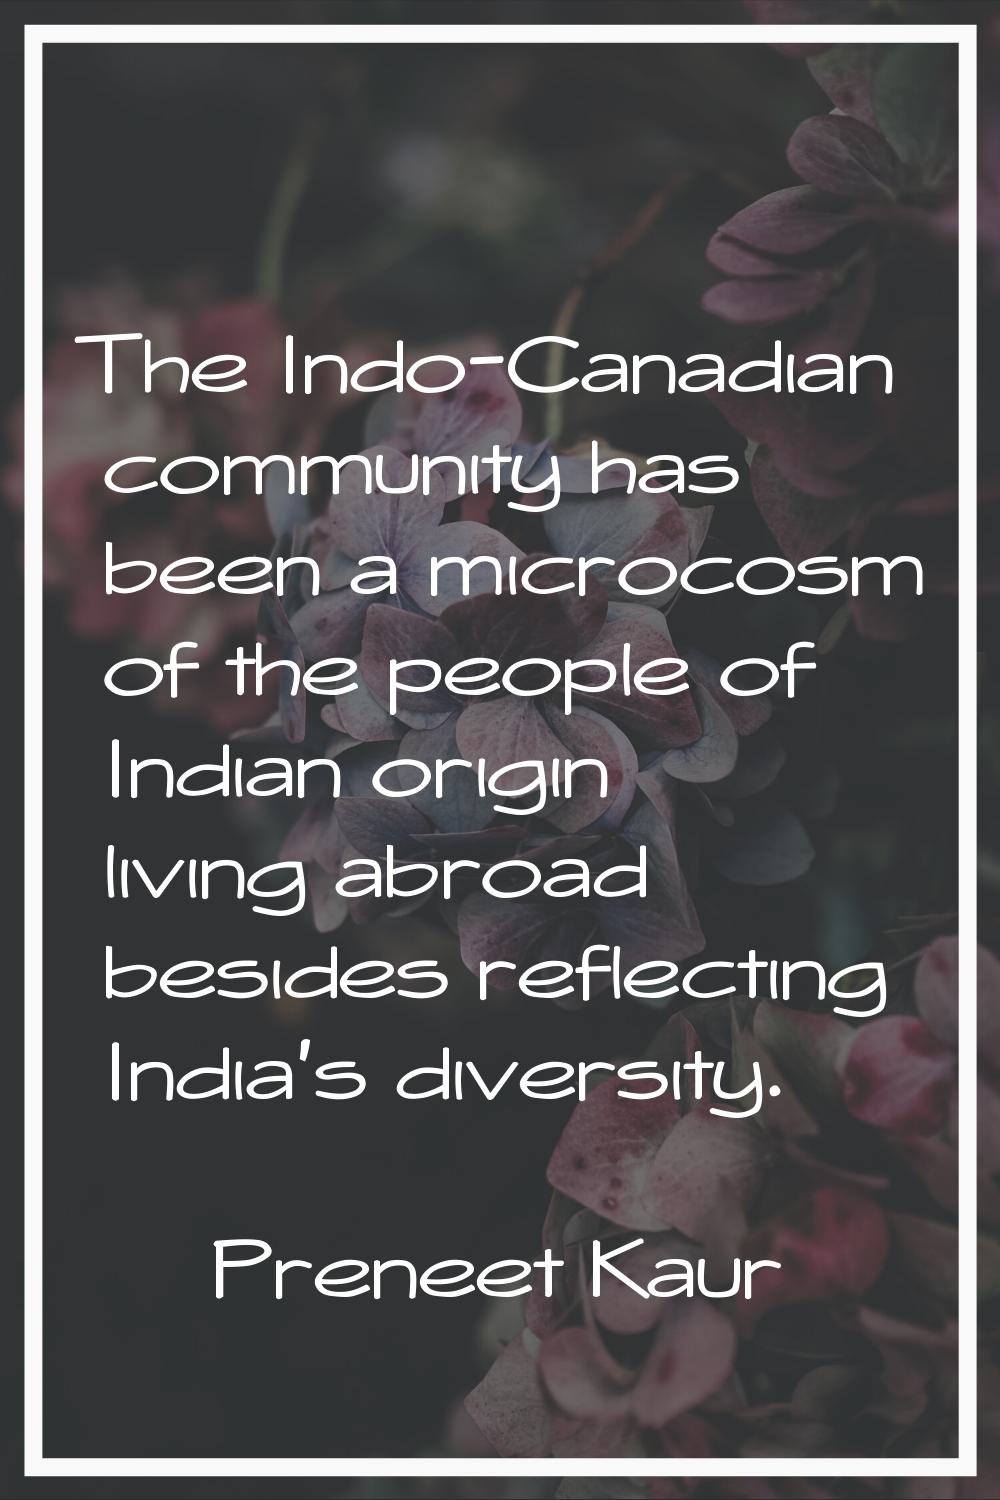 The Indo-Canadian community has been a microcosm of the people of Indian origin living abroad besid